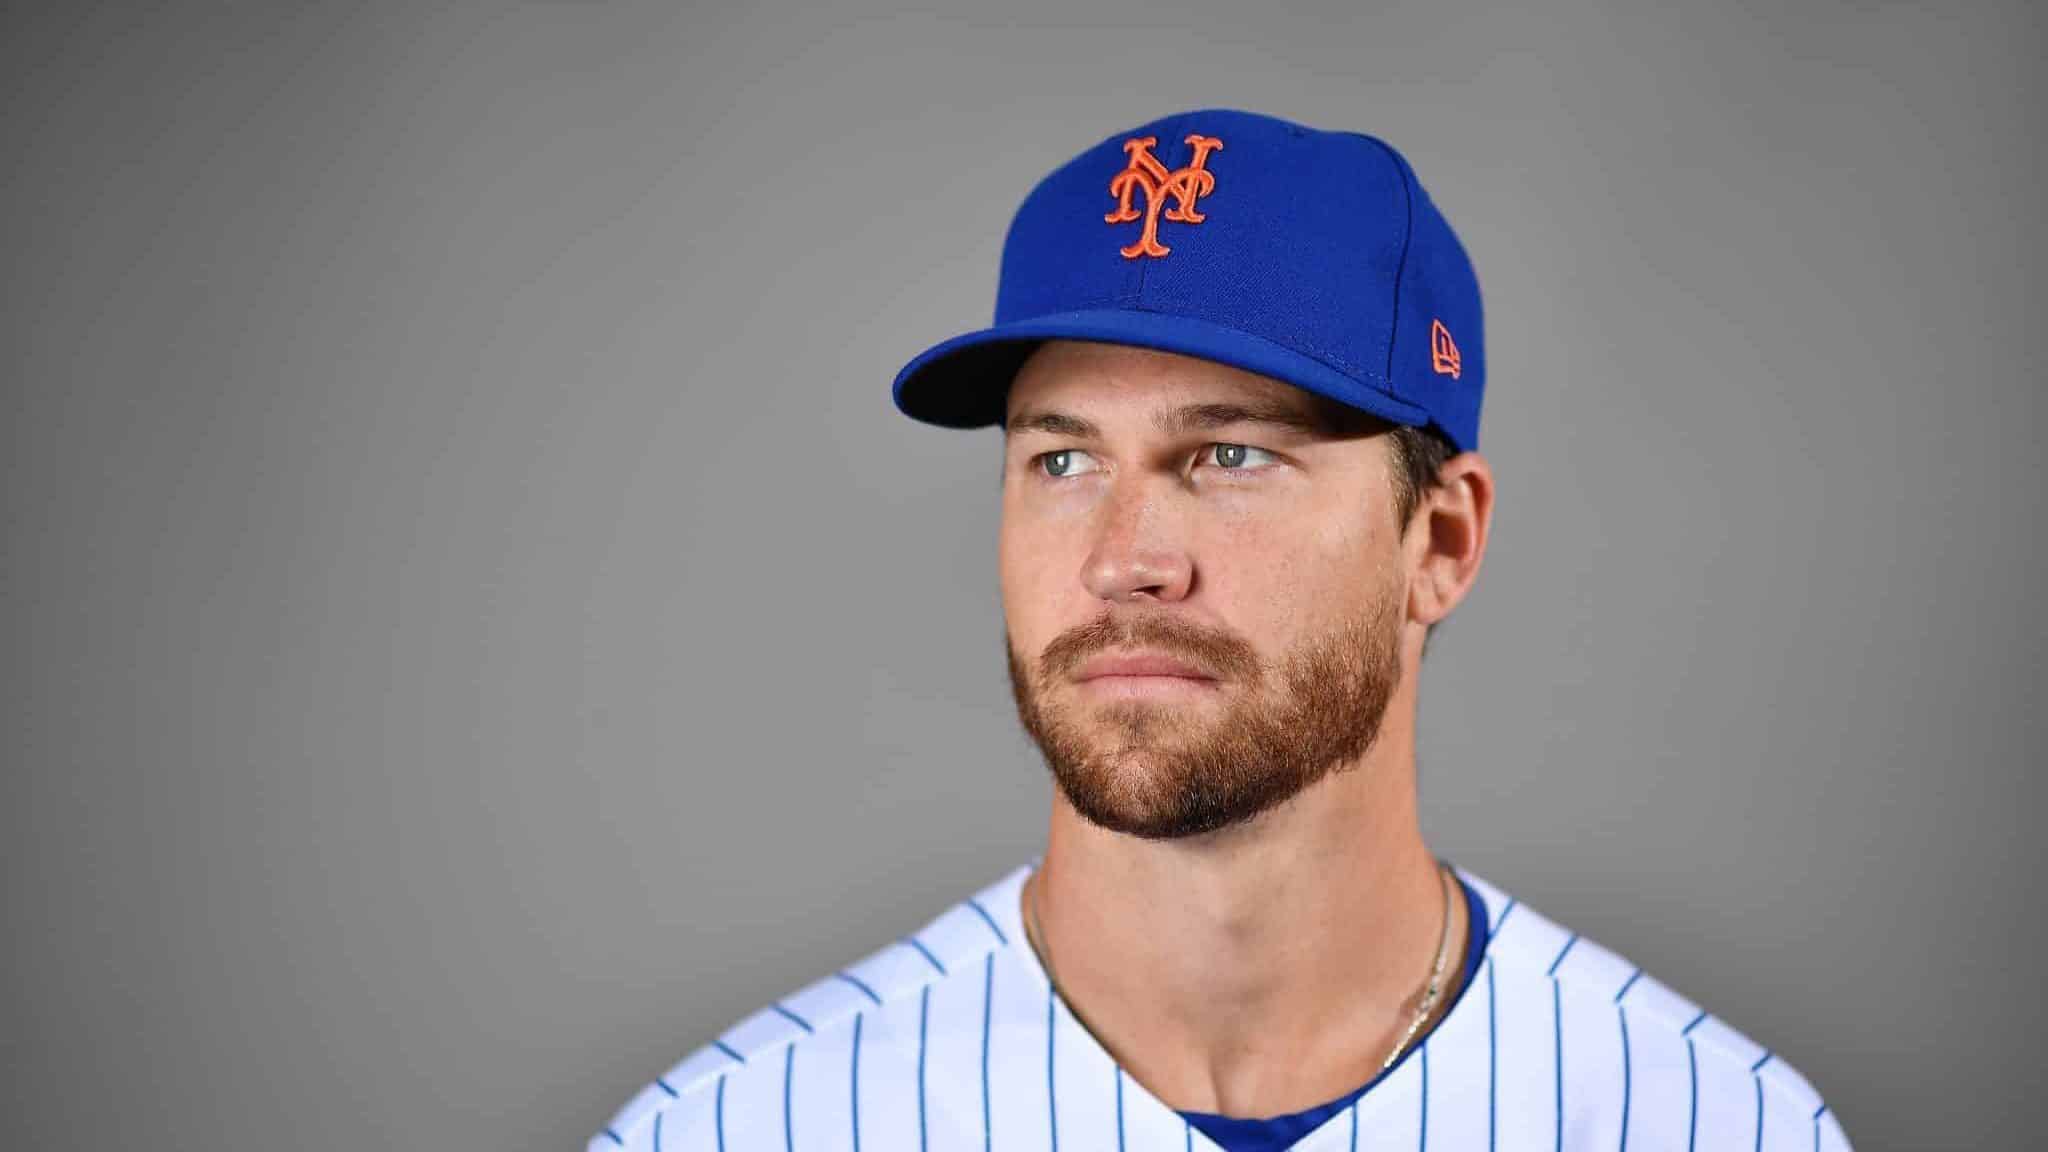 PORT ST. LUCIE, FLORIDA - FEBRUARY 20: Jacob deGrom #48 of the New York Mets poses for a photo during Photo Day at Clover Park on February 20, 2020 in Port St. Lucie, Florida.